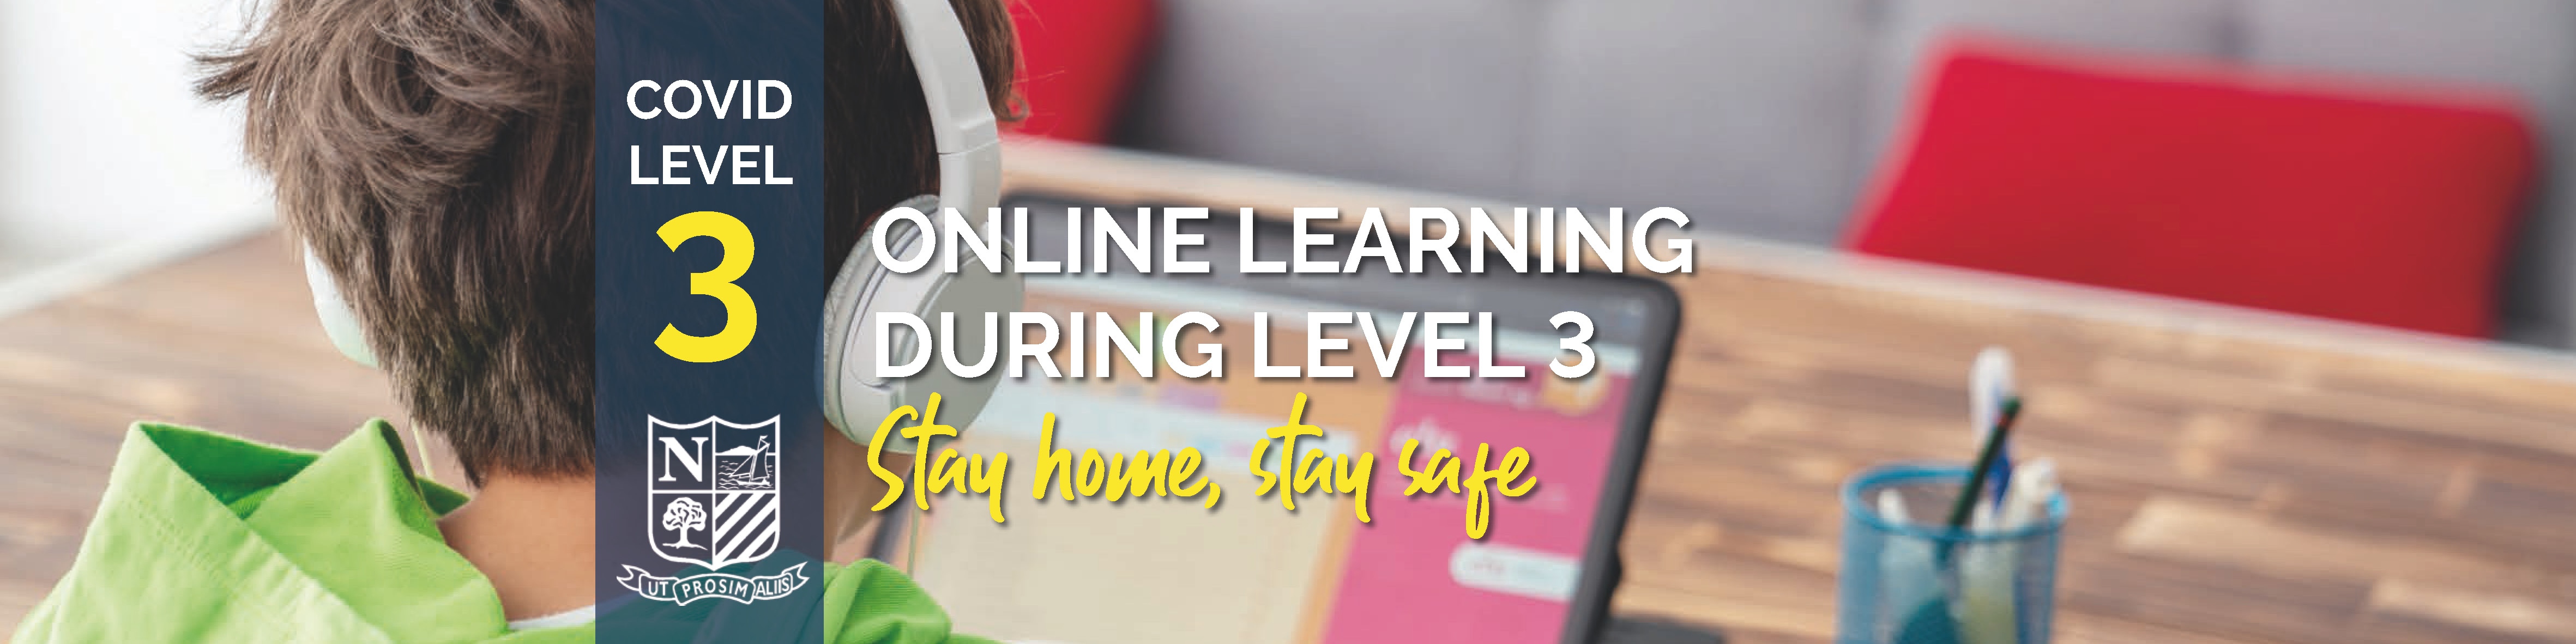 Term 4 online at Level 3